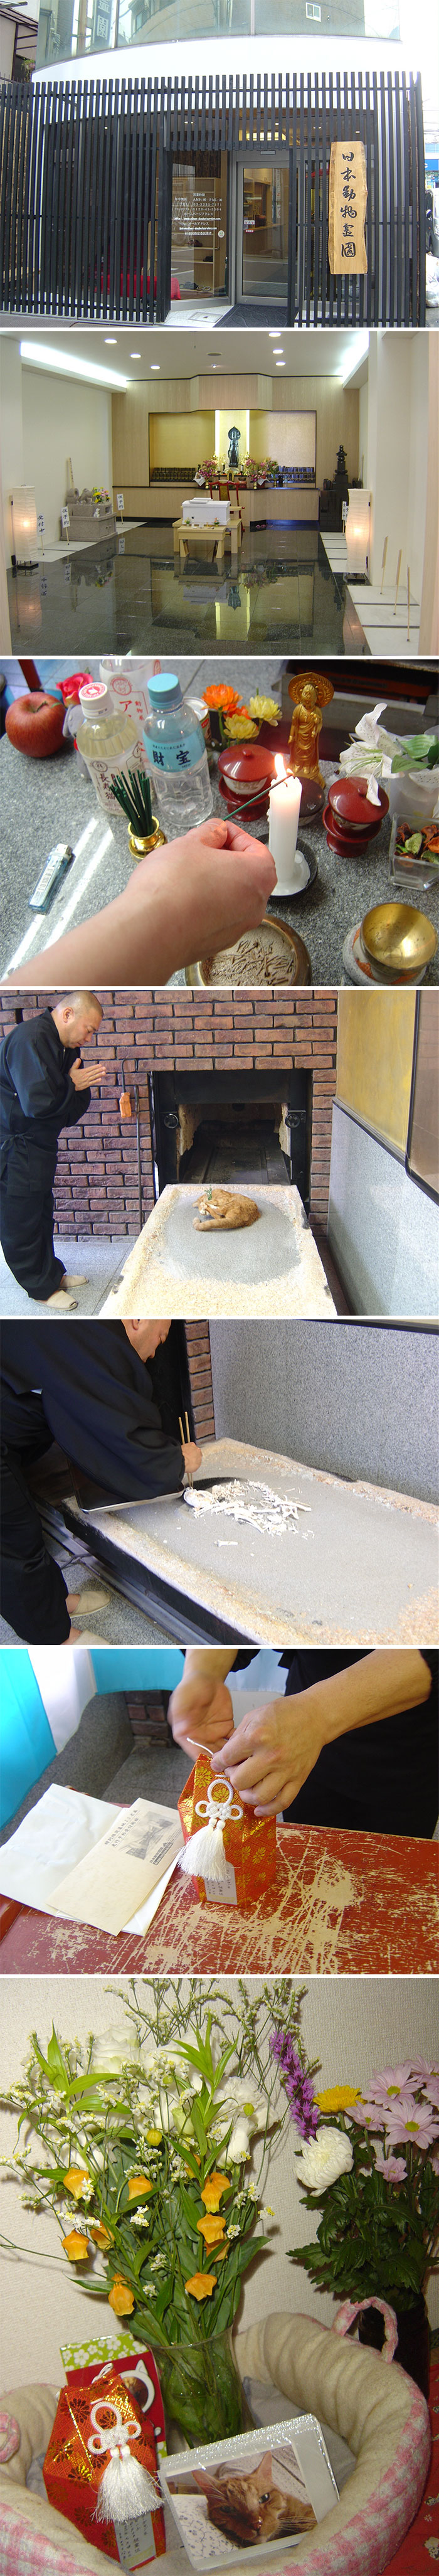 Buddhist Funeral For Our Cat In Tokyo In 2009. The Rituals Are Similar To Those For People